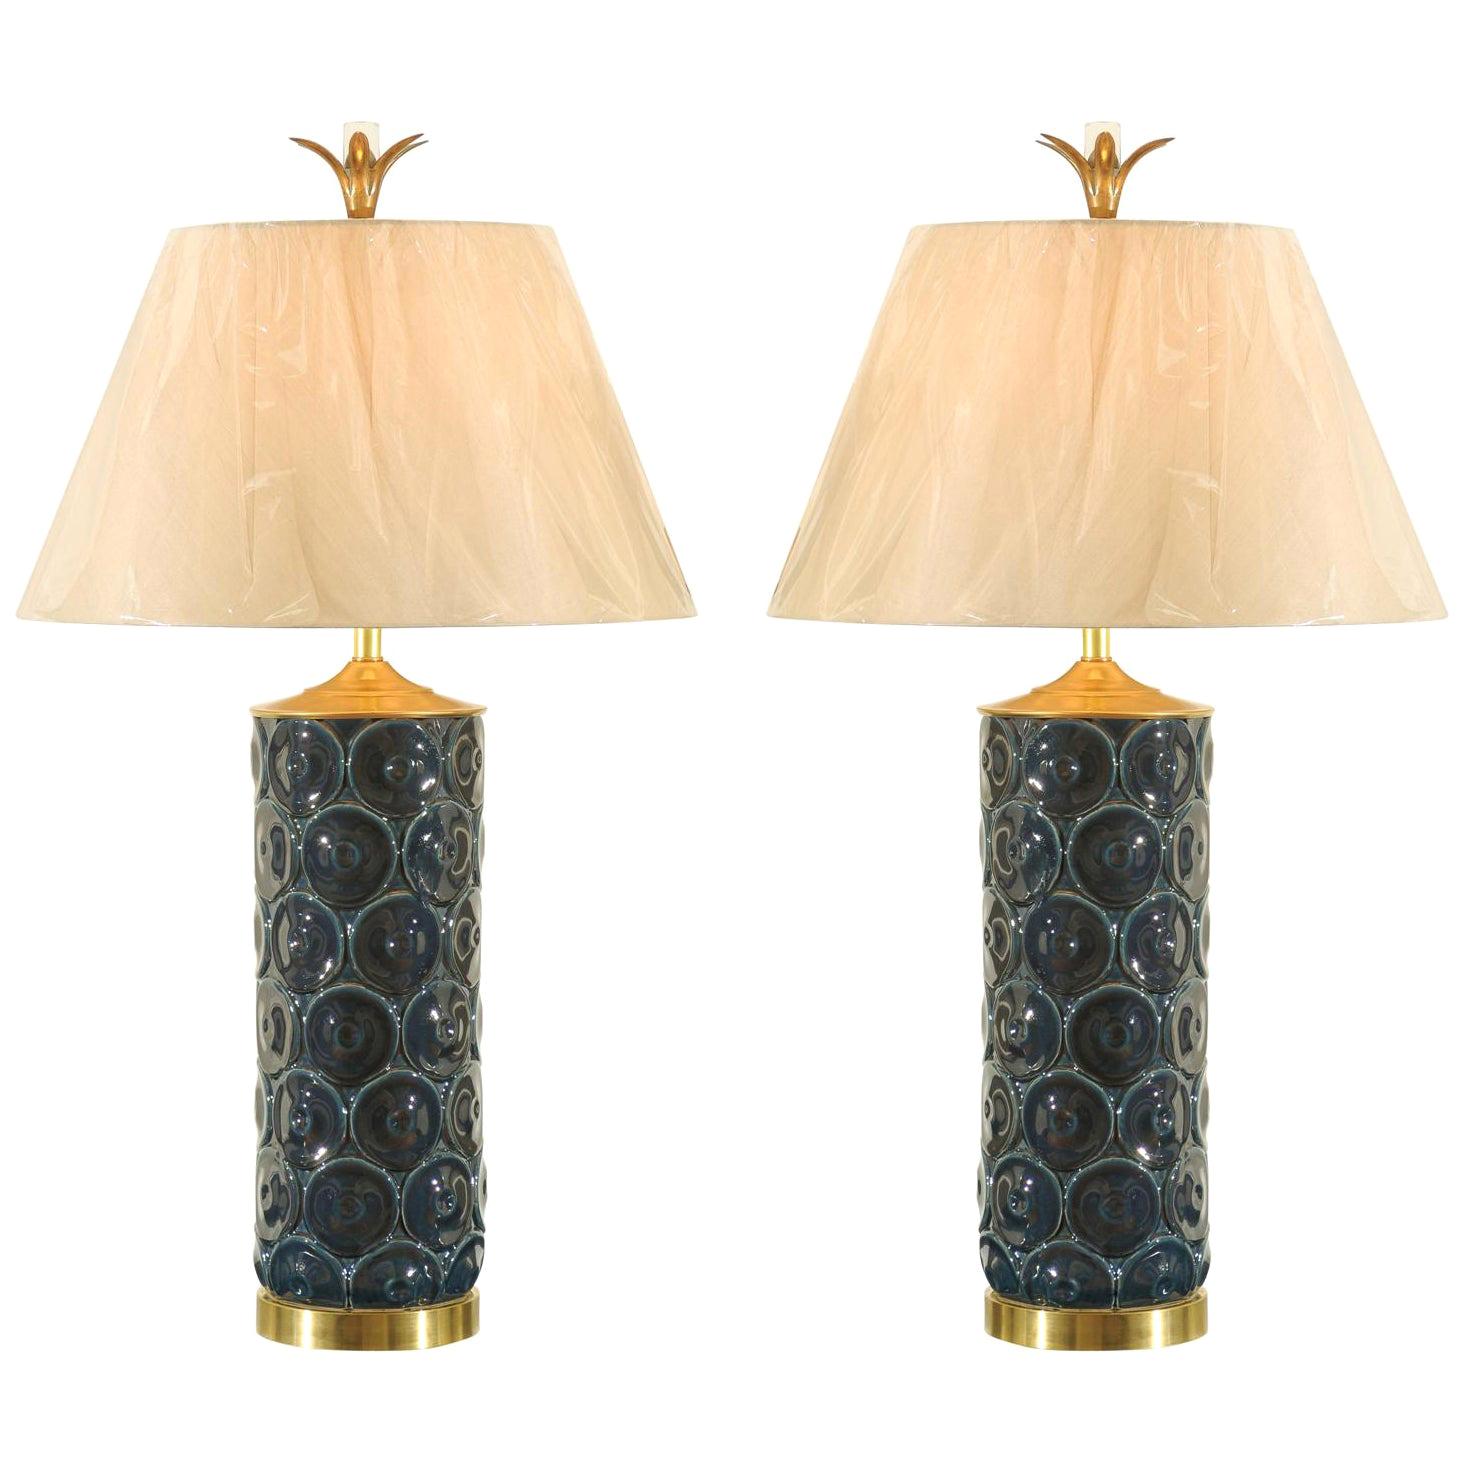 Stunning Restored Pair of Vintage Ceramic, Brass and Lucite Lamps, circa 1970 For Sale